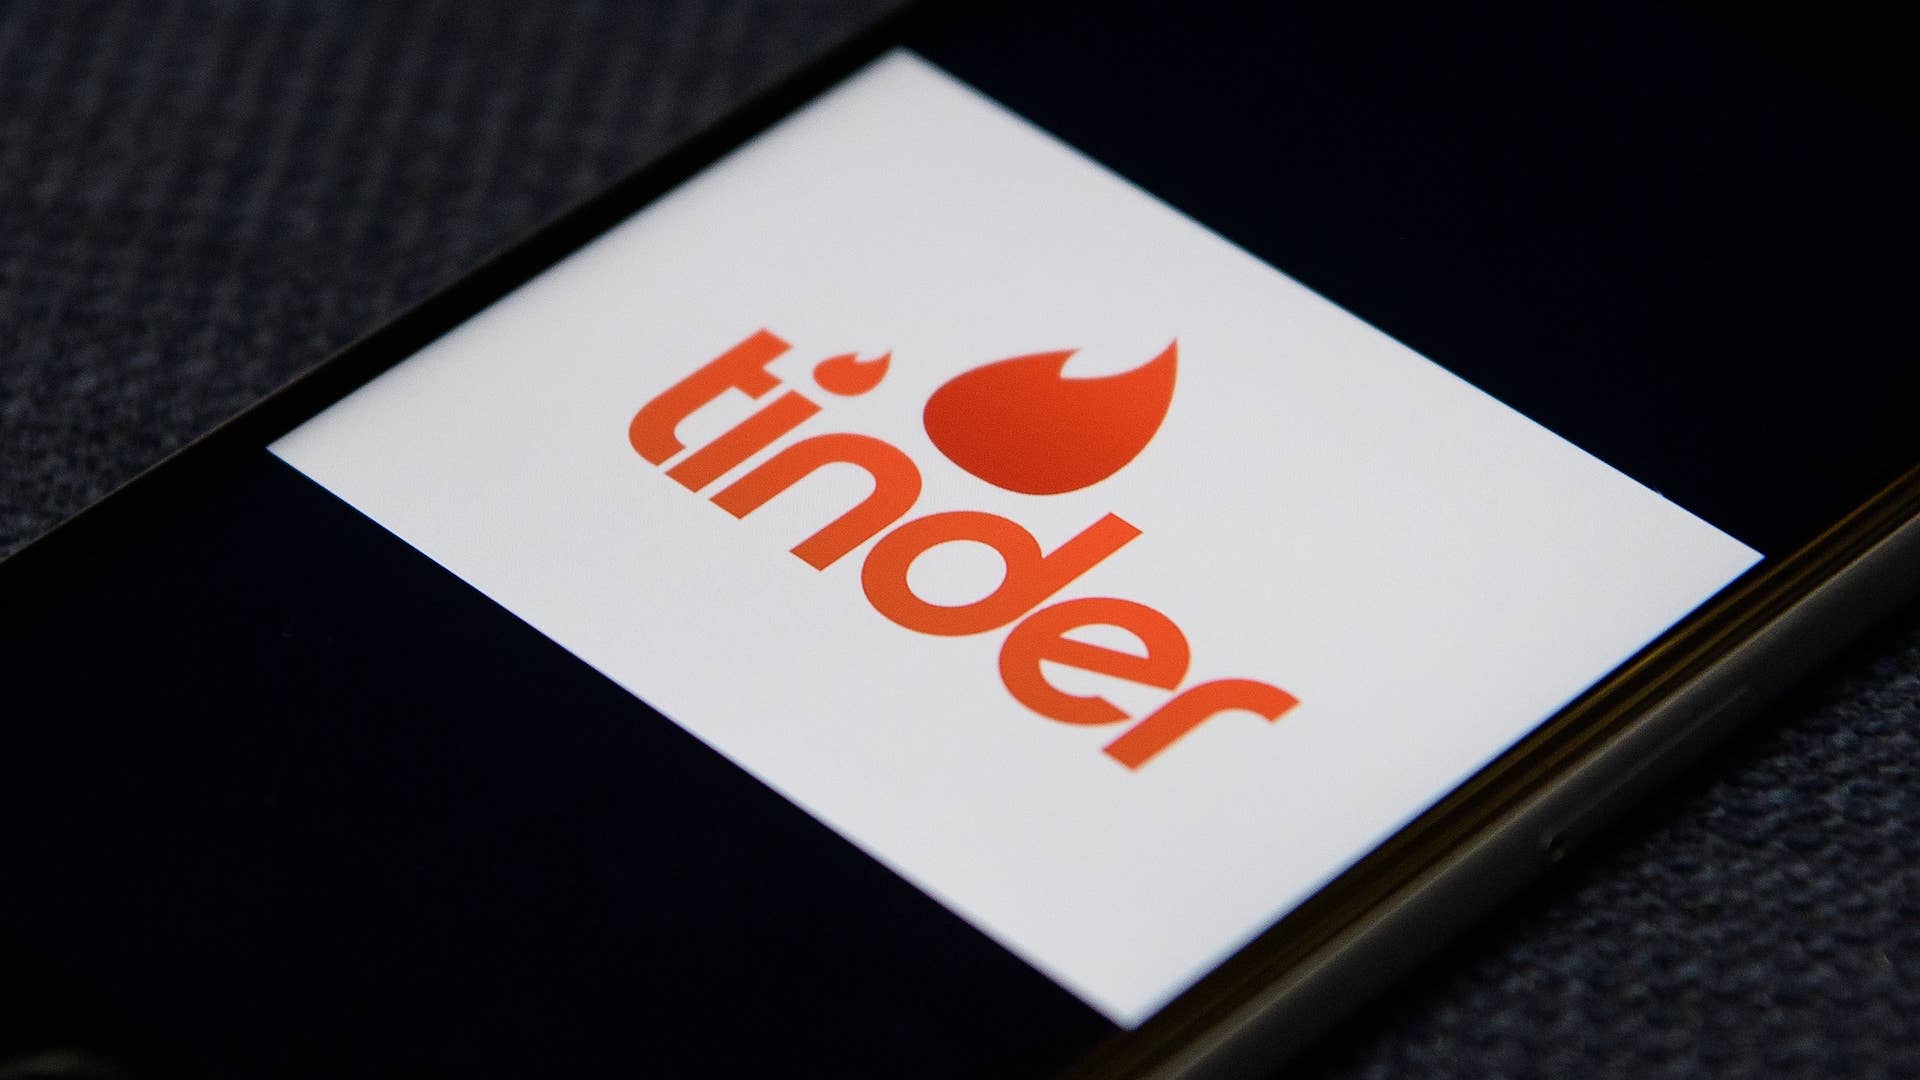 Photograph of Tinder app on phone